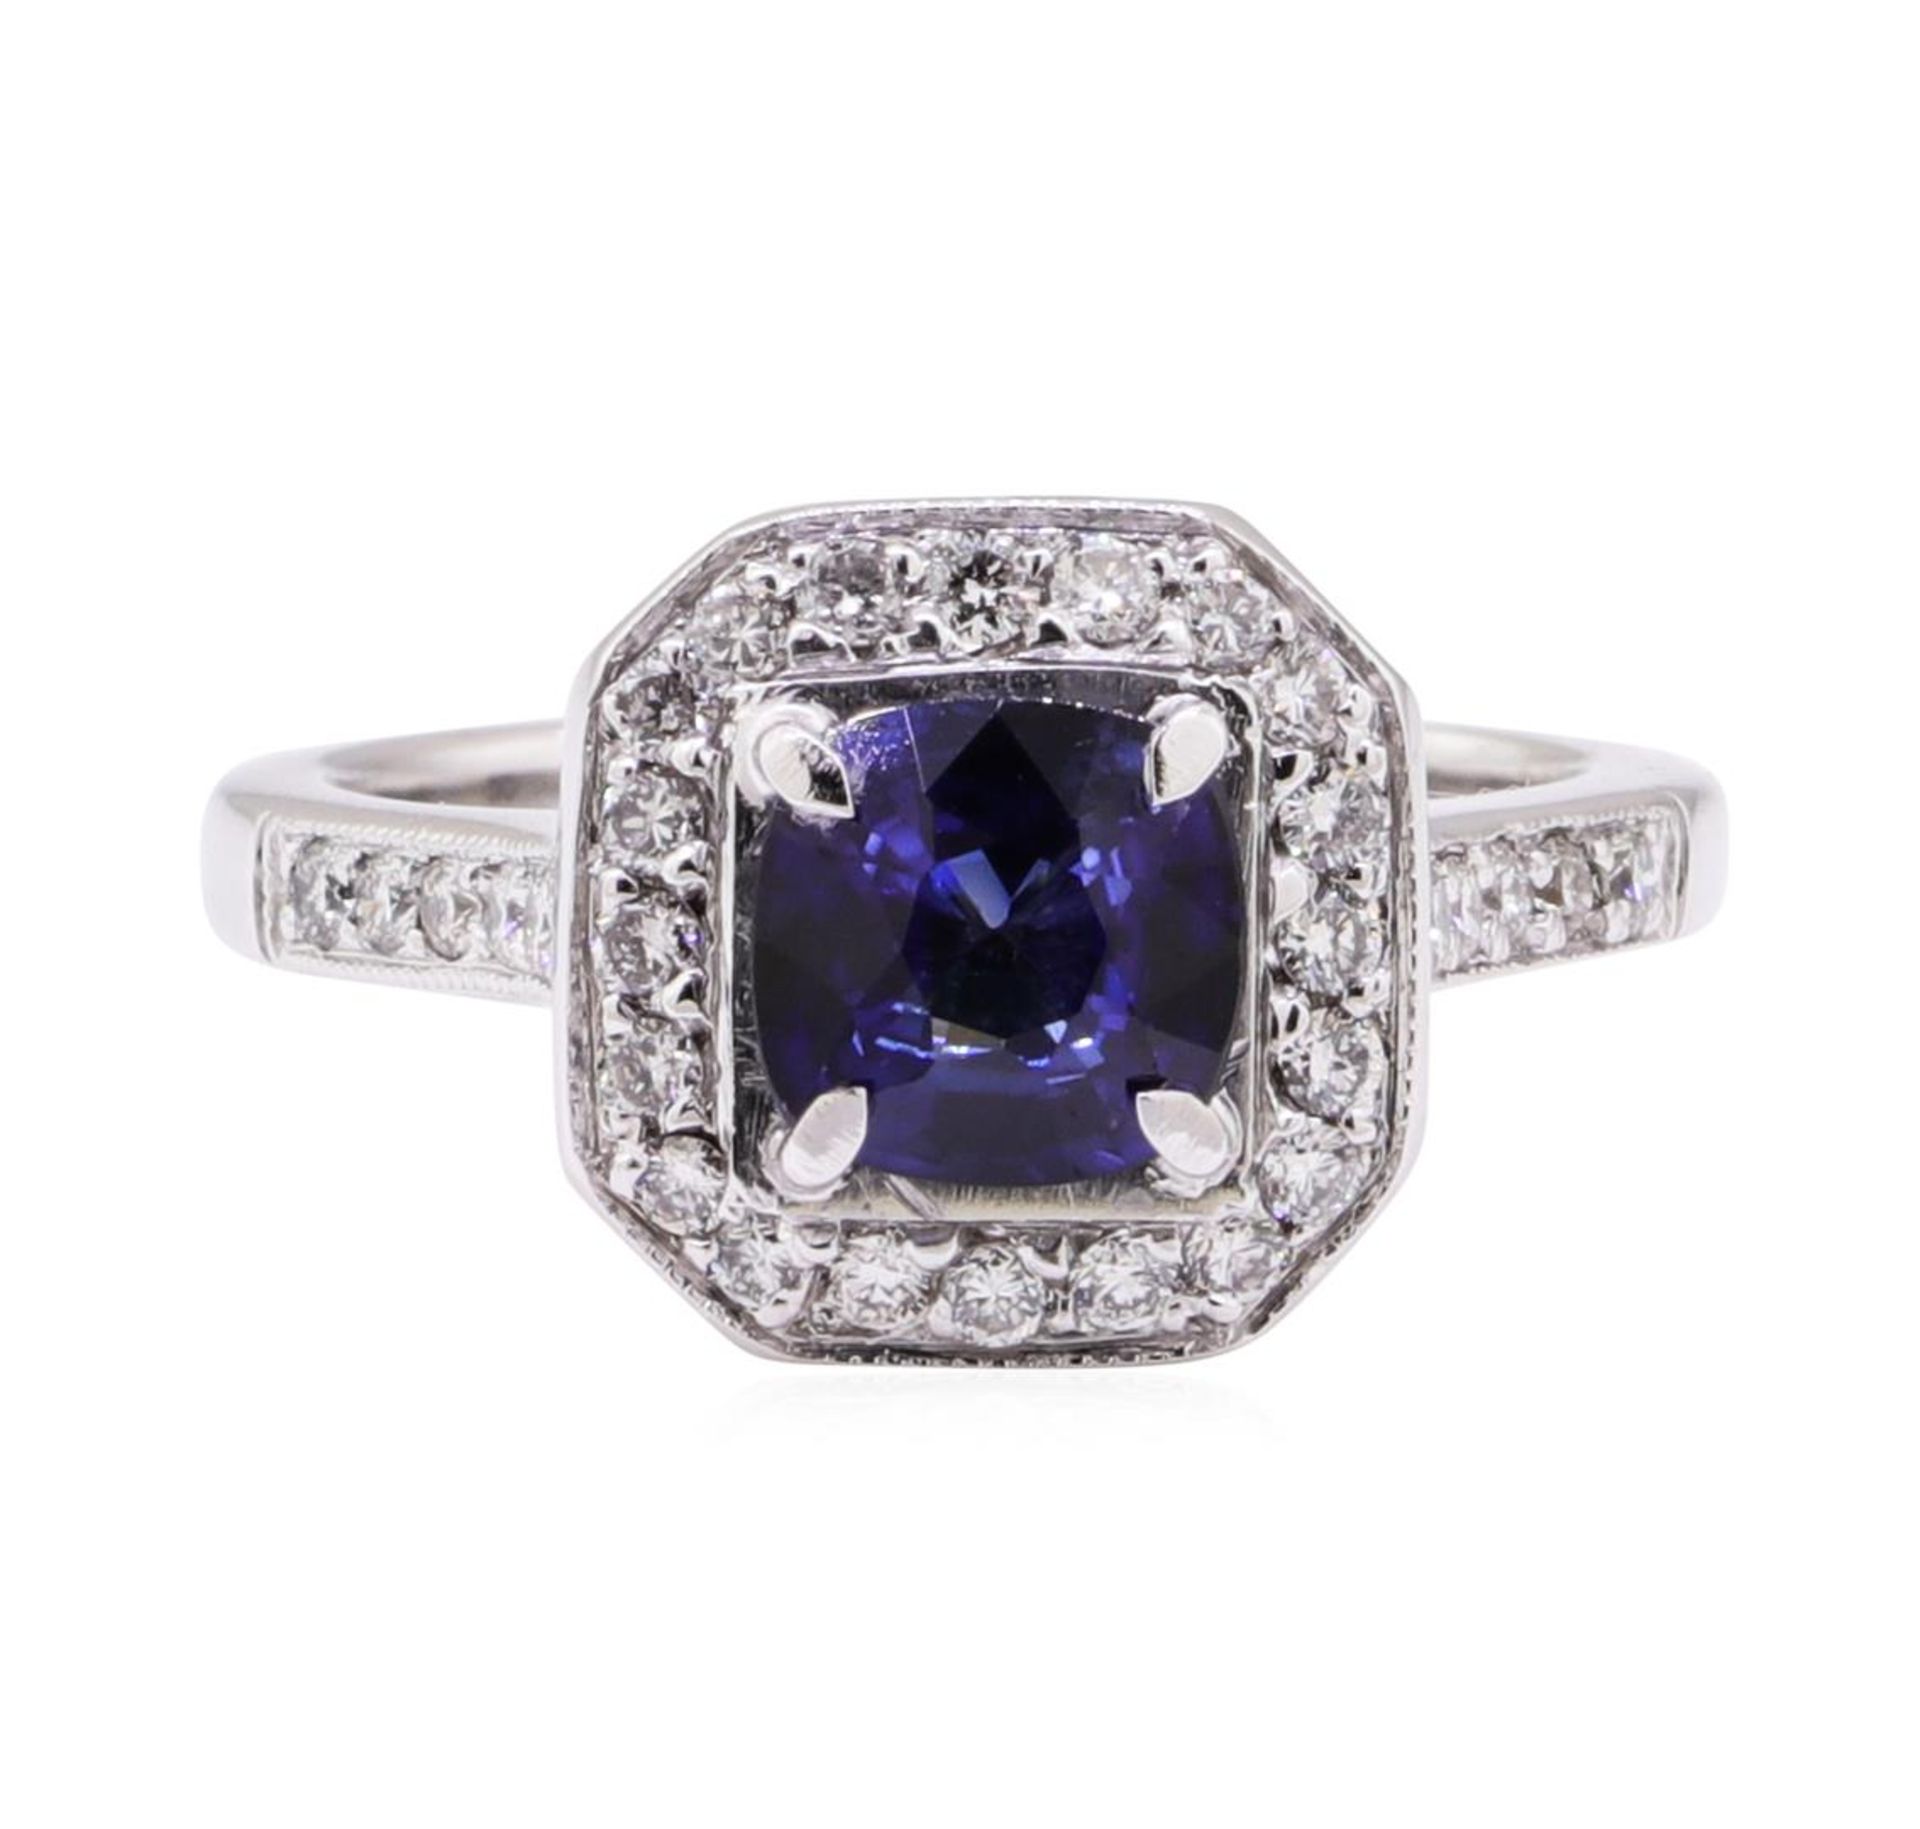 1.64 ctw Blue Sapphire And Diamond Ring - 14KT White Gold - Image 2 of 5